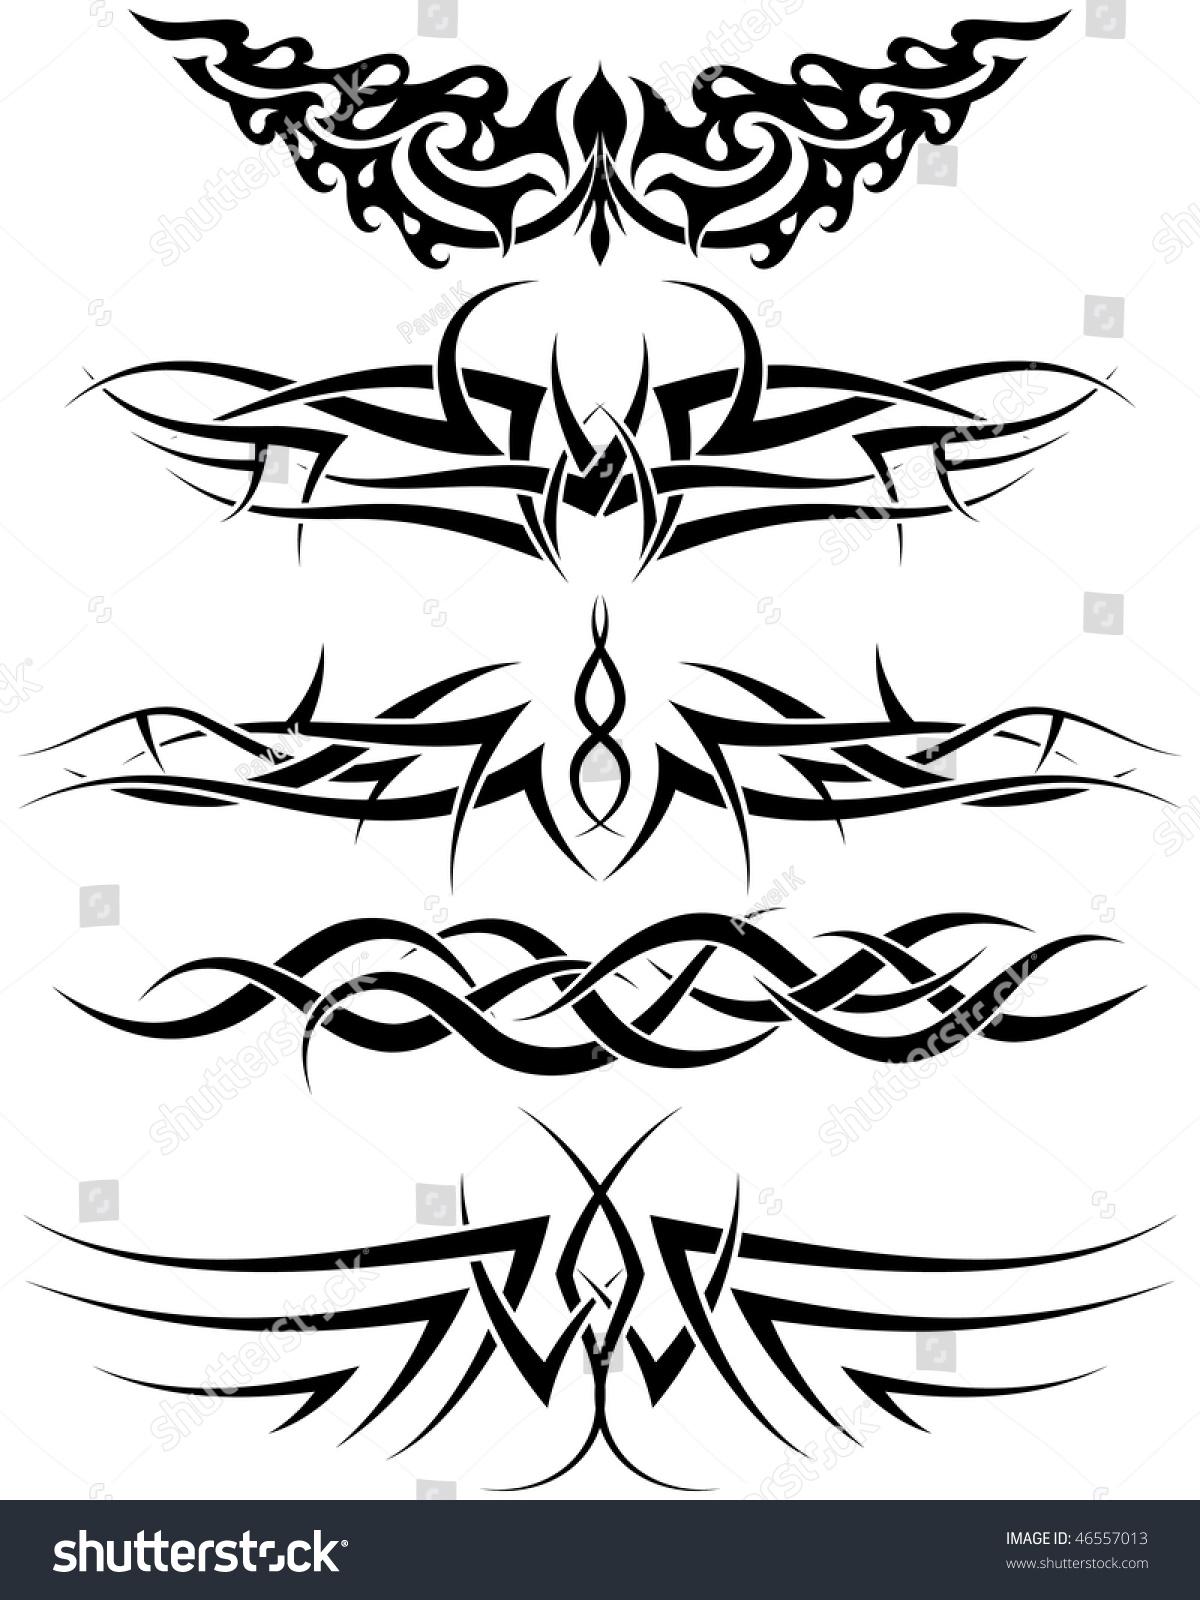 Patterns Of Tribal Tattoo For Design Use Stock Vector Illustration ...